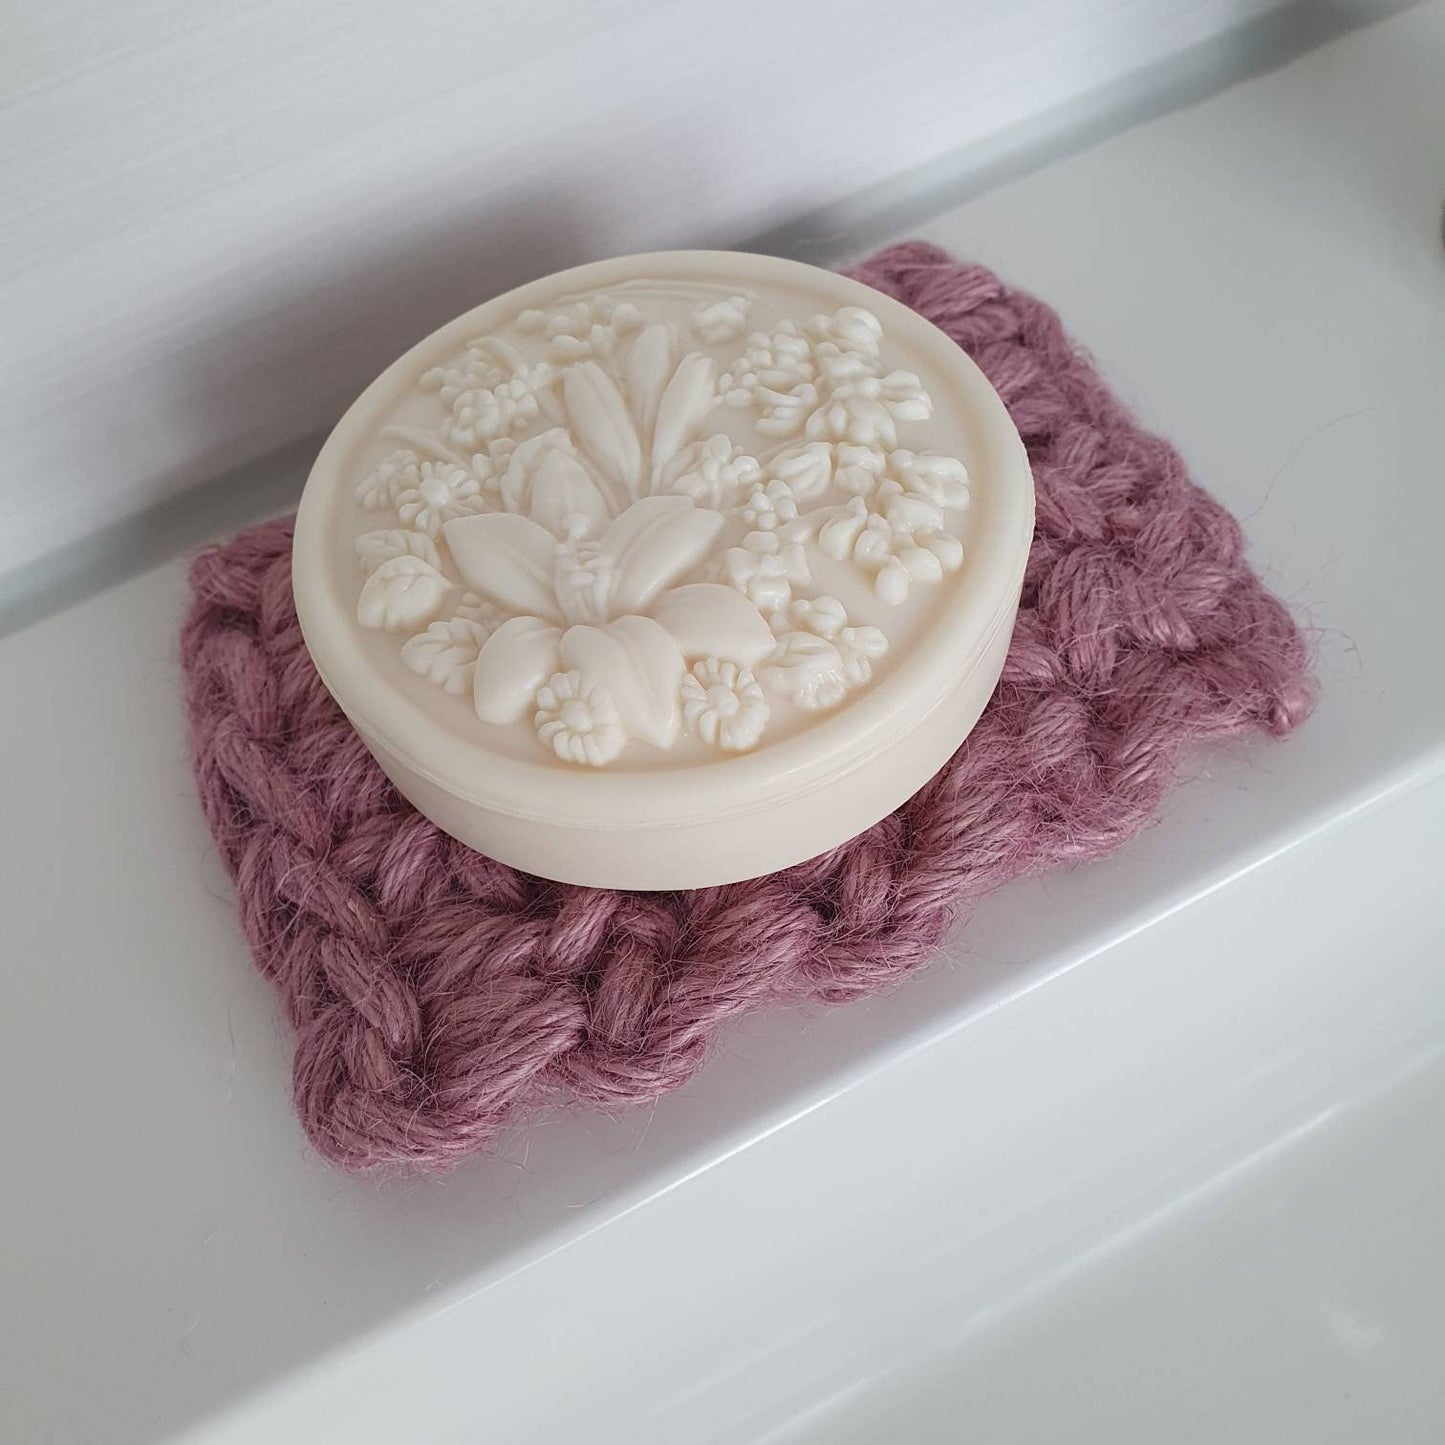 Soap base crocheted from 100% natural jute, robust durable and plastic-free